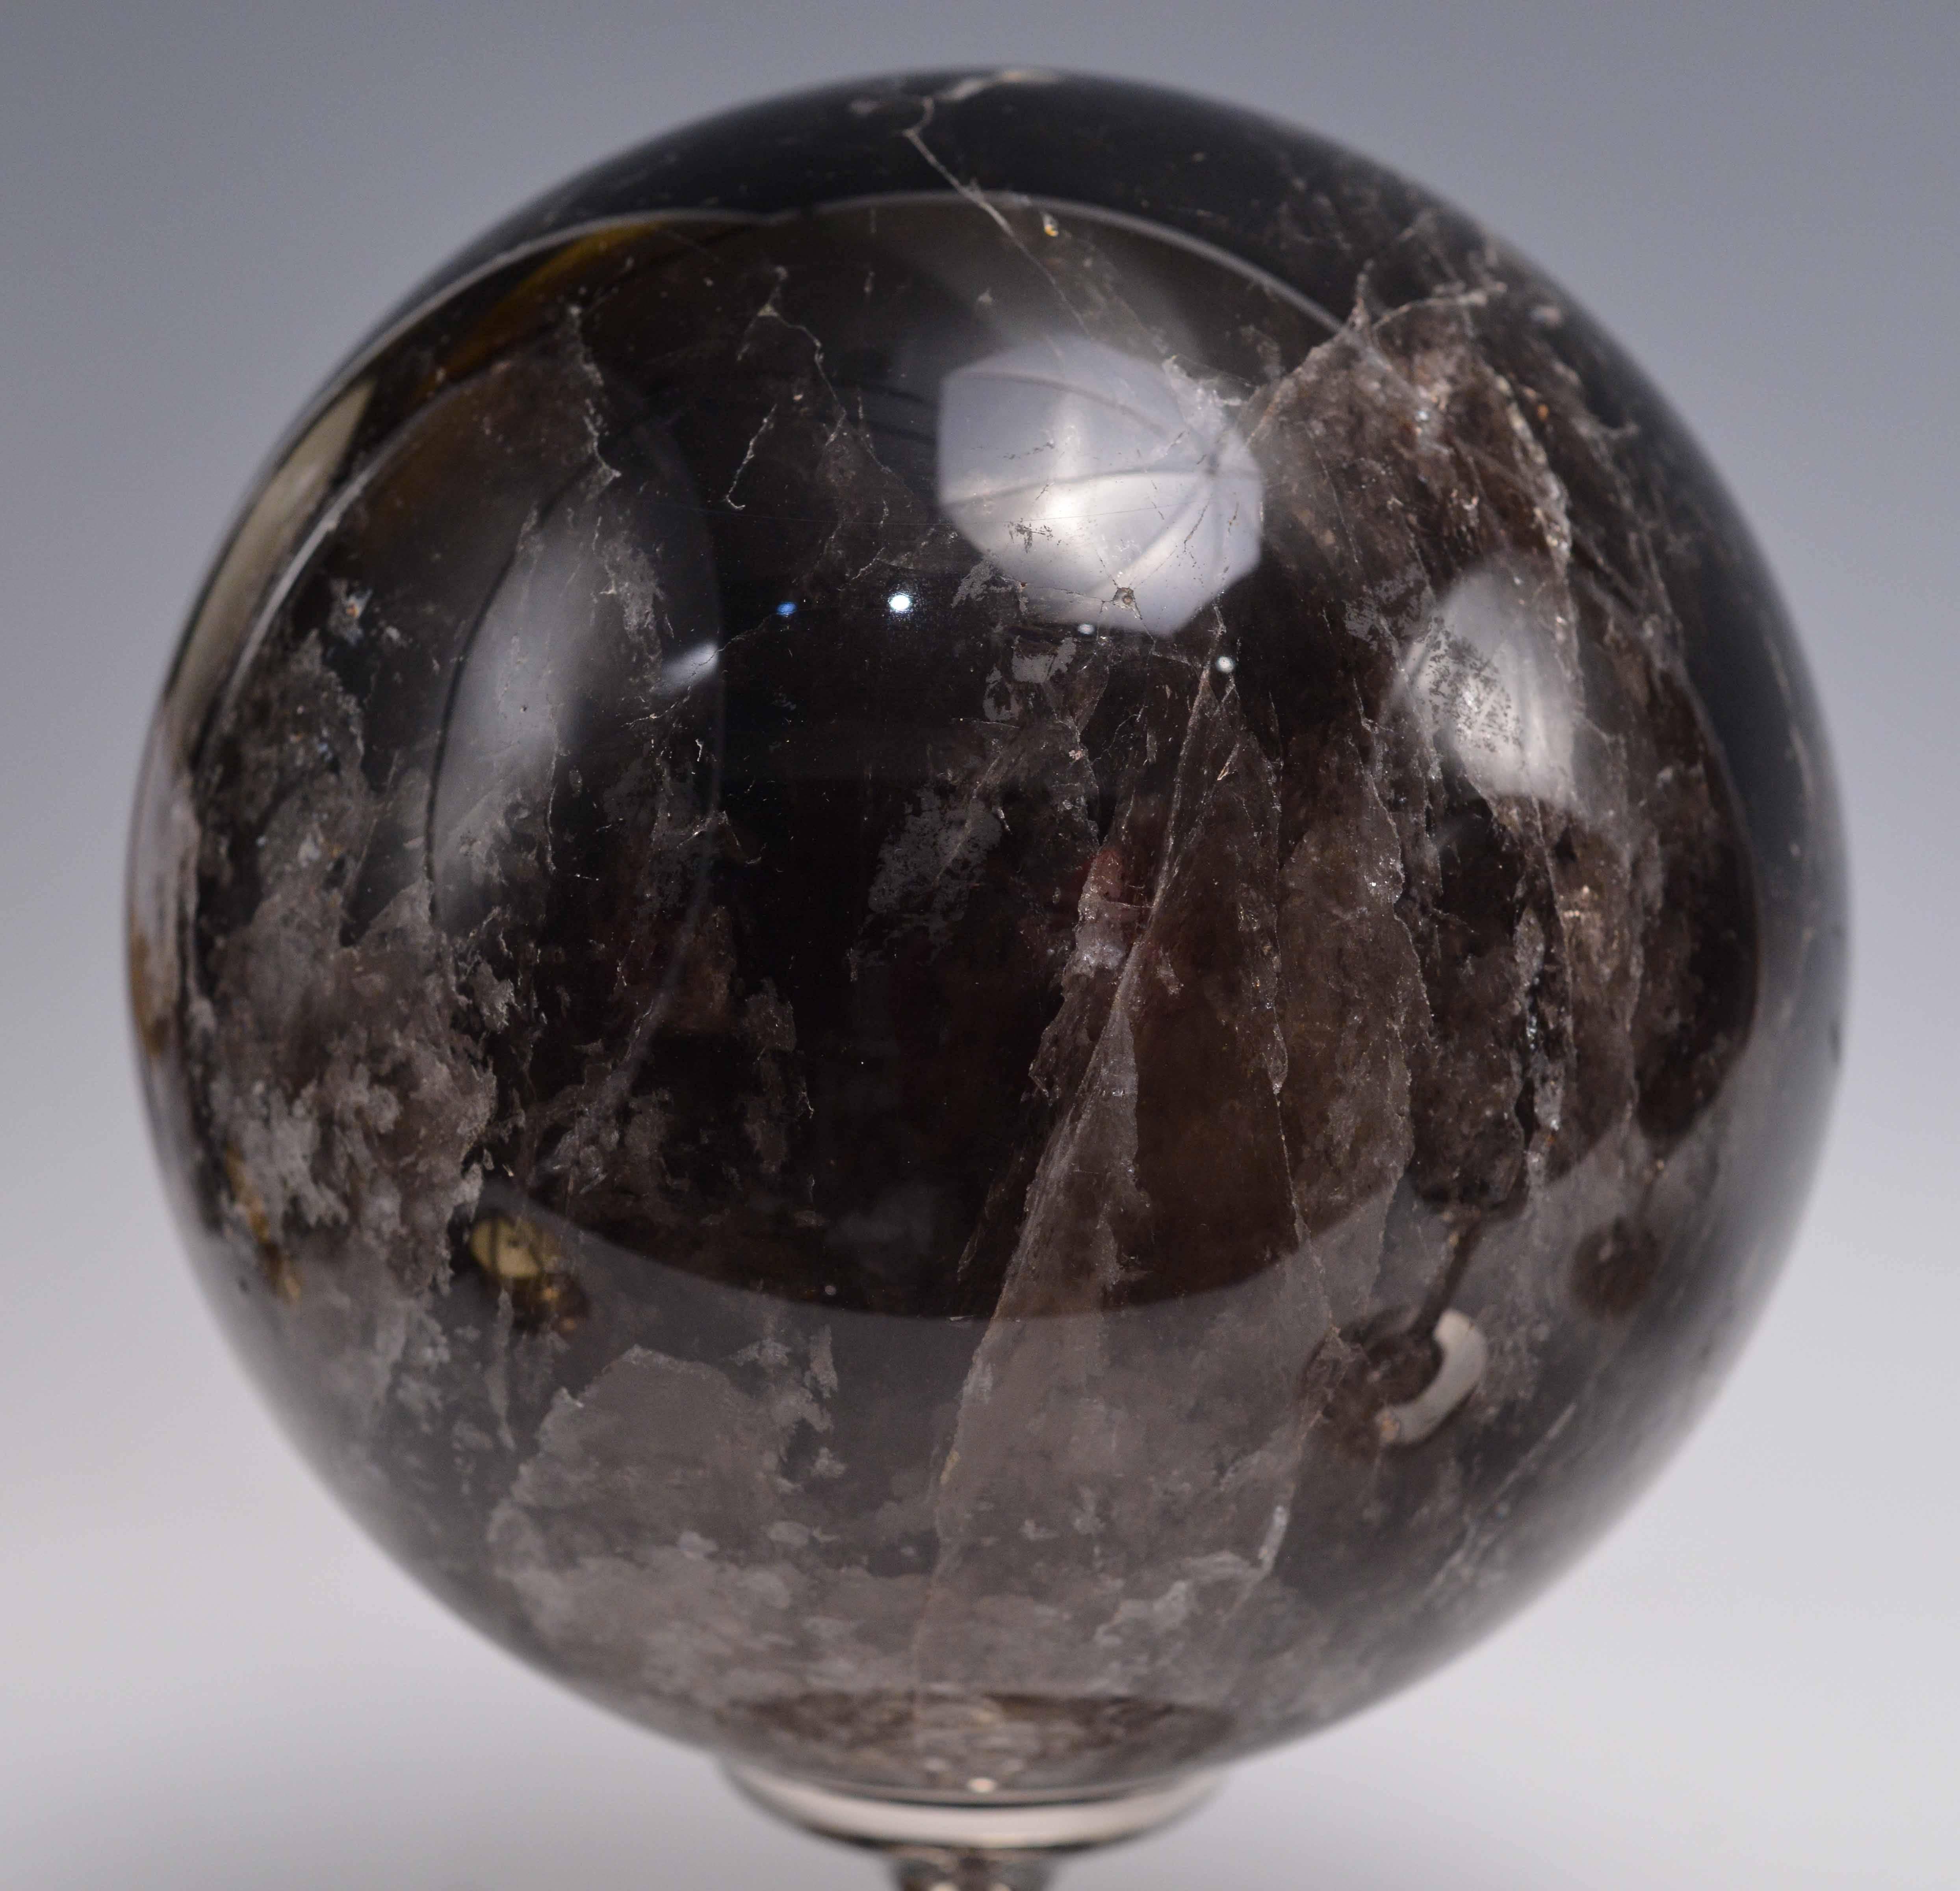 A group of three dark rock crystal balls with nickel plating bases.

Measure: (from left to right)
10